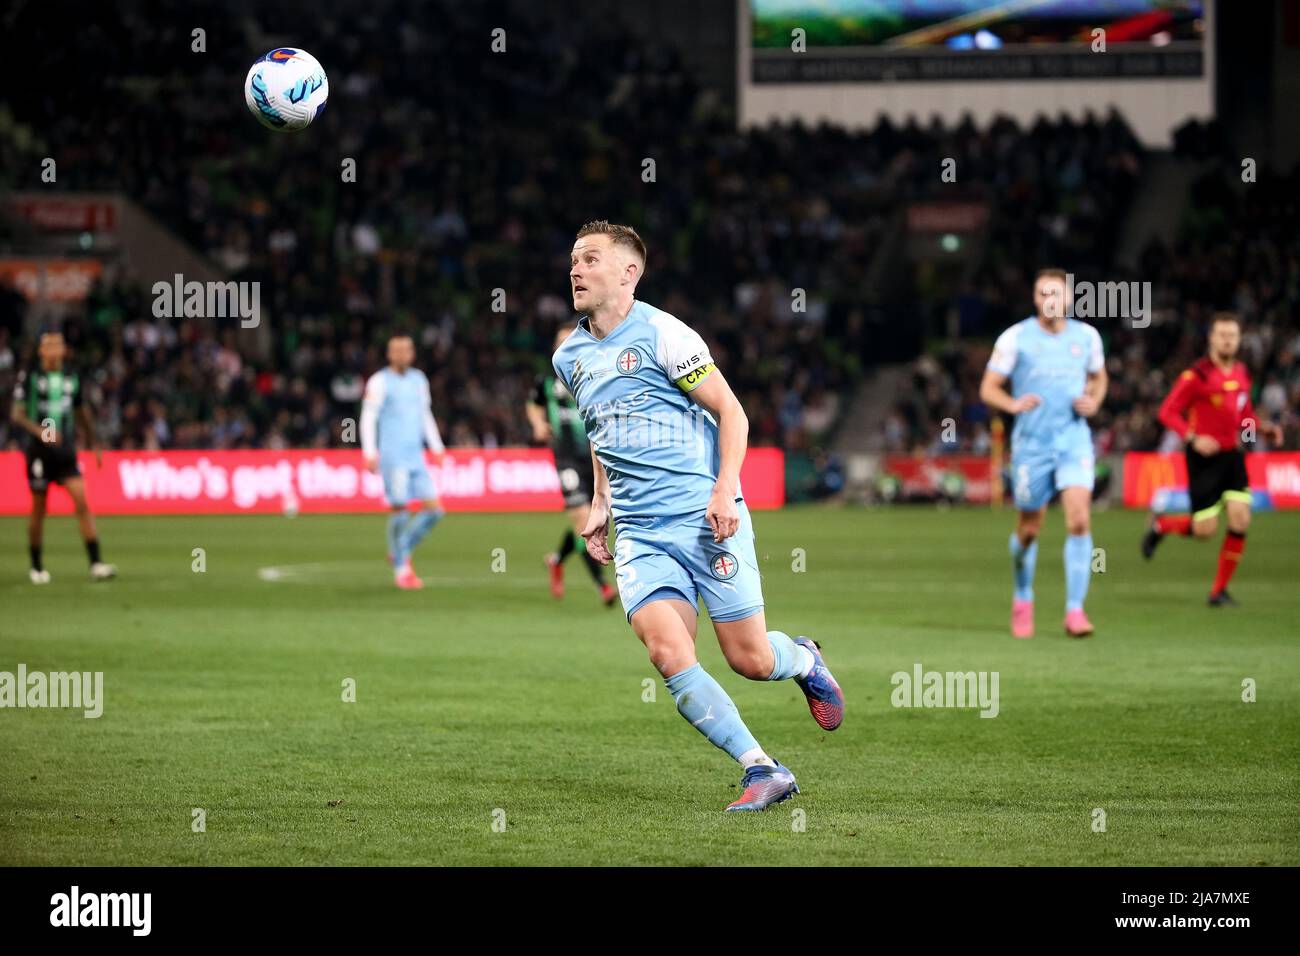 Melbourne, Australia, 28 May, 2022. Scott Jamieson of Melbourne City FC controls the ball during the A-League Grand Final soccer match between Melbourne City FC and Western United at AAMI Park on May 28, 2022 in Melbourne, Australia. Credit: Dave Hewison/Speed Media/Alamy Live News Stock Photo